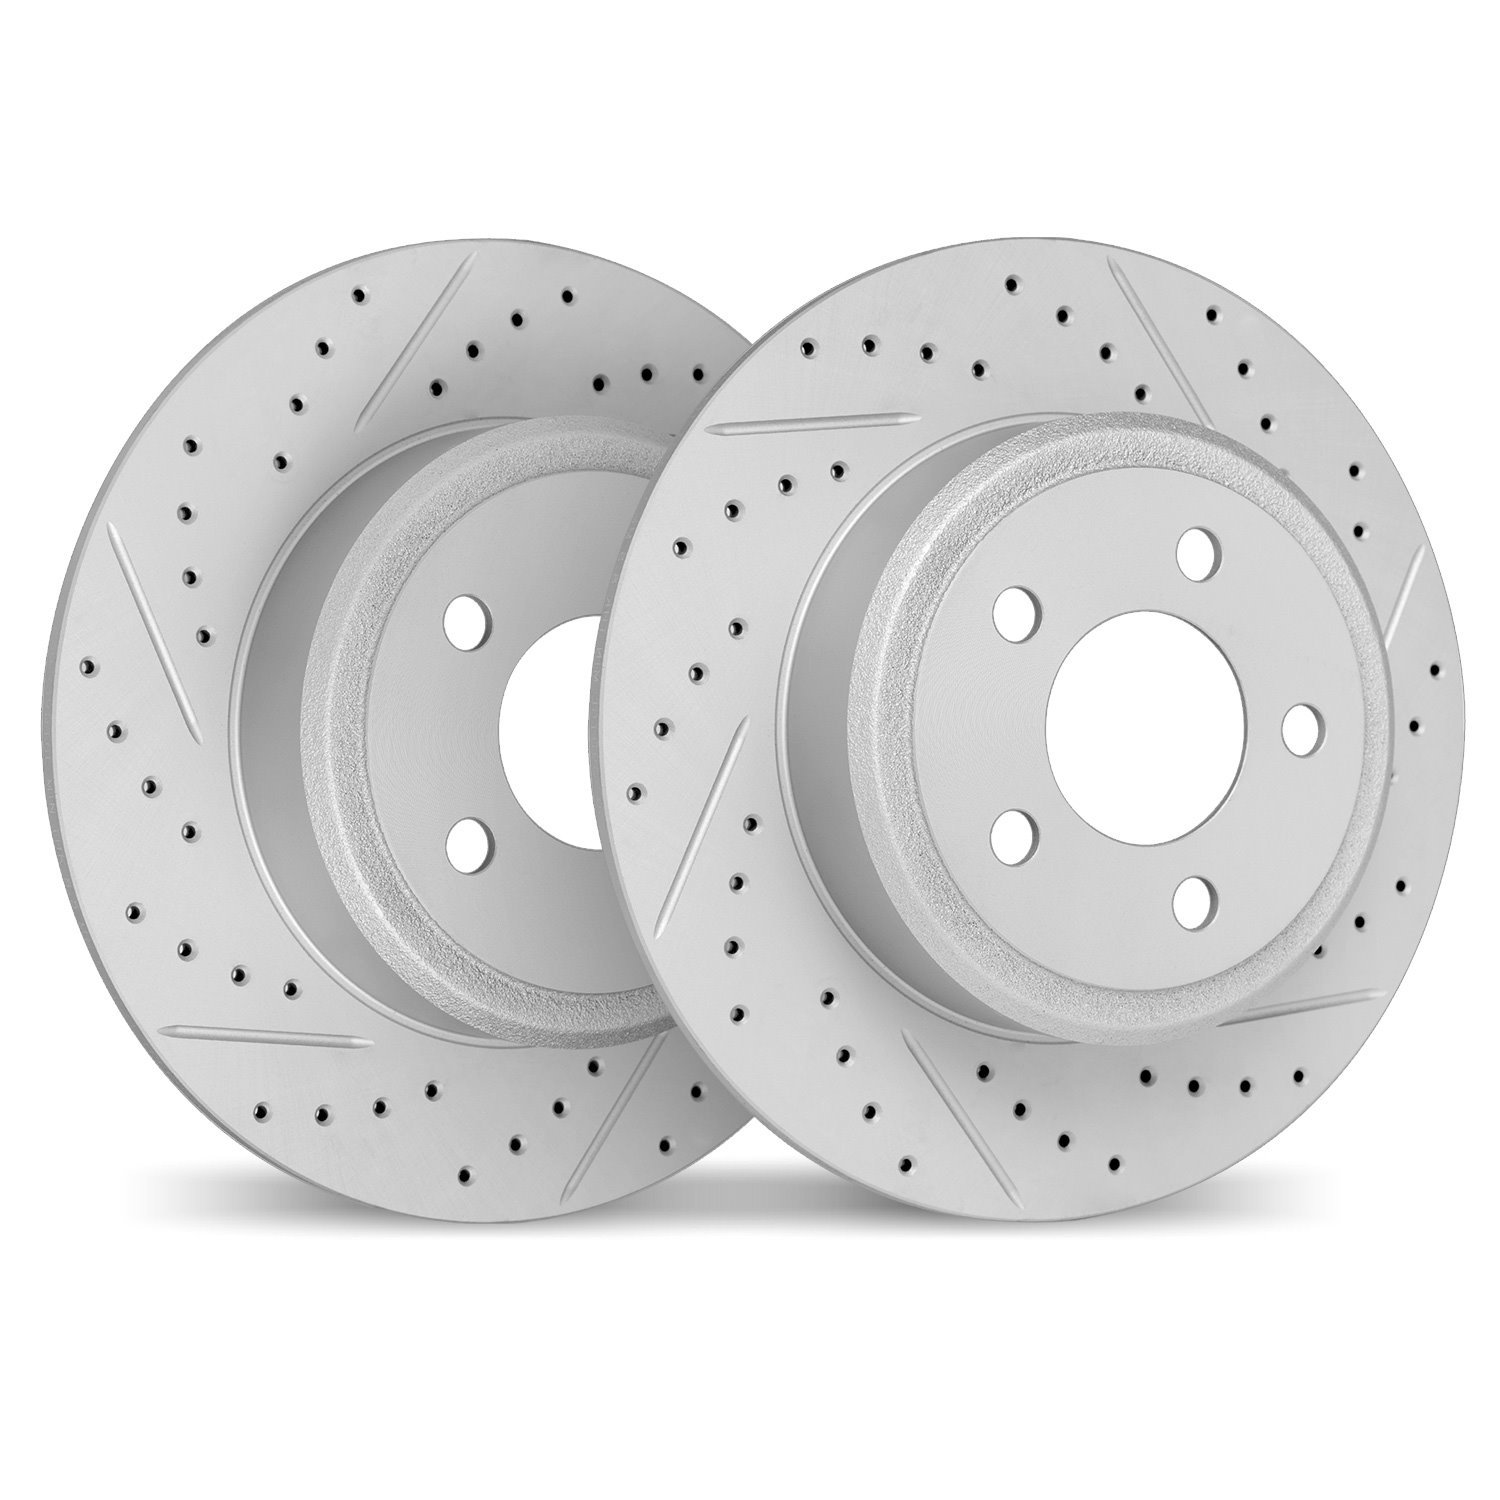 2002-65011 Geoperformance Drilled/Slotted Brake Rotors, 1997-2008 GM, Position: Rear